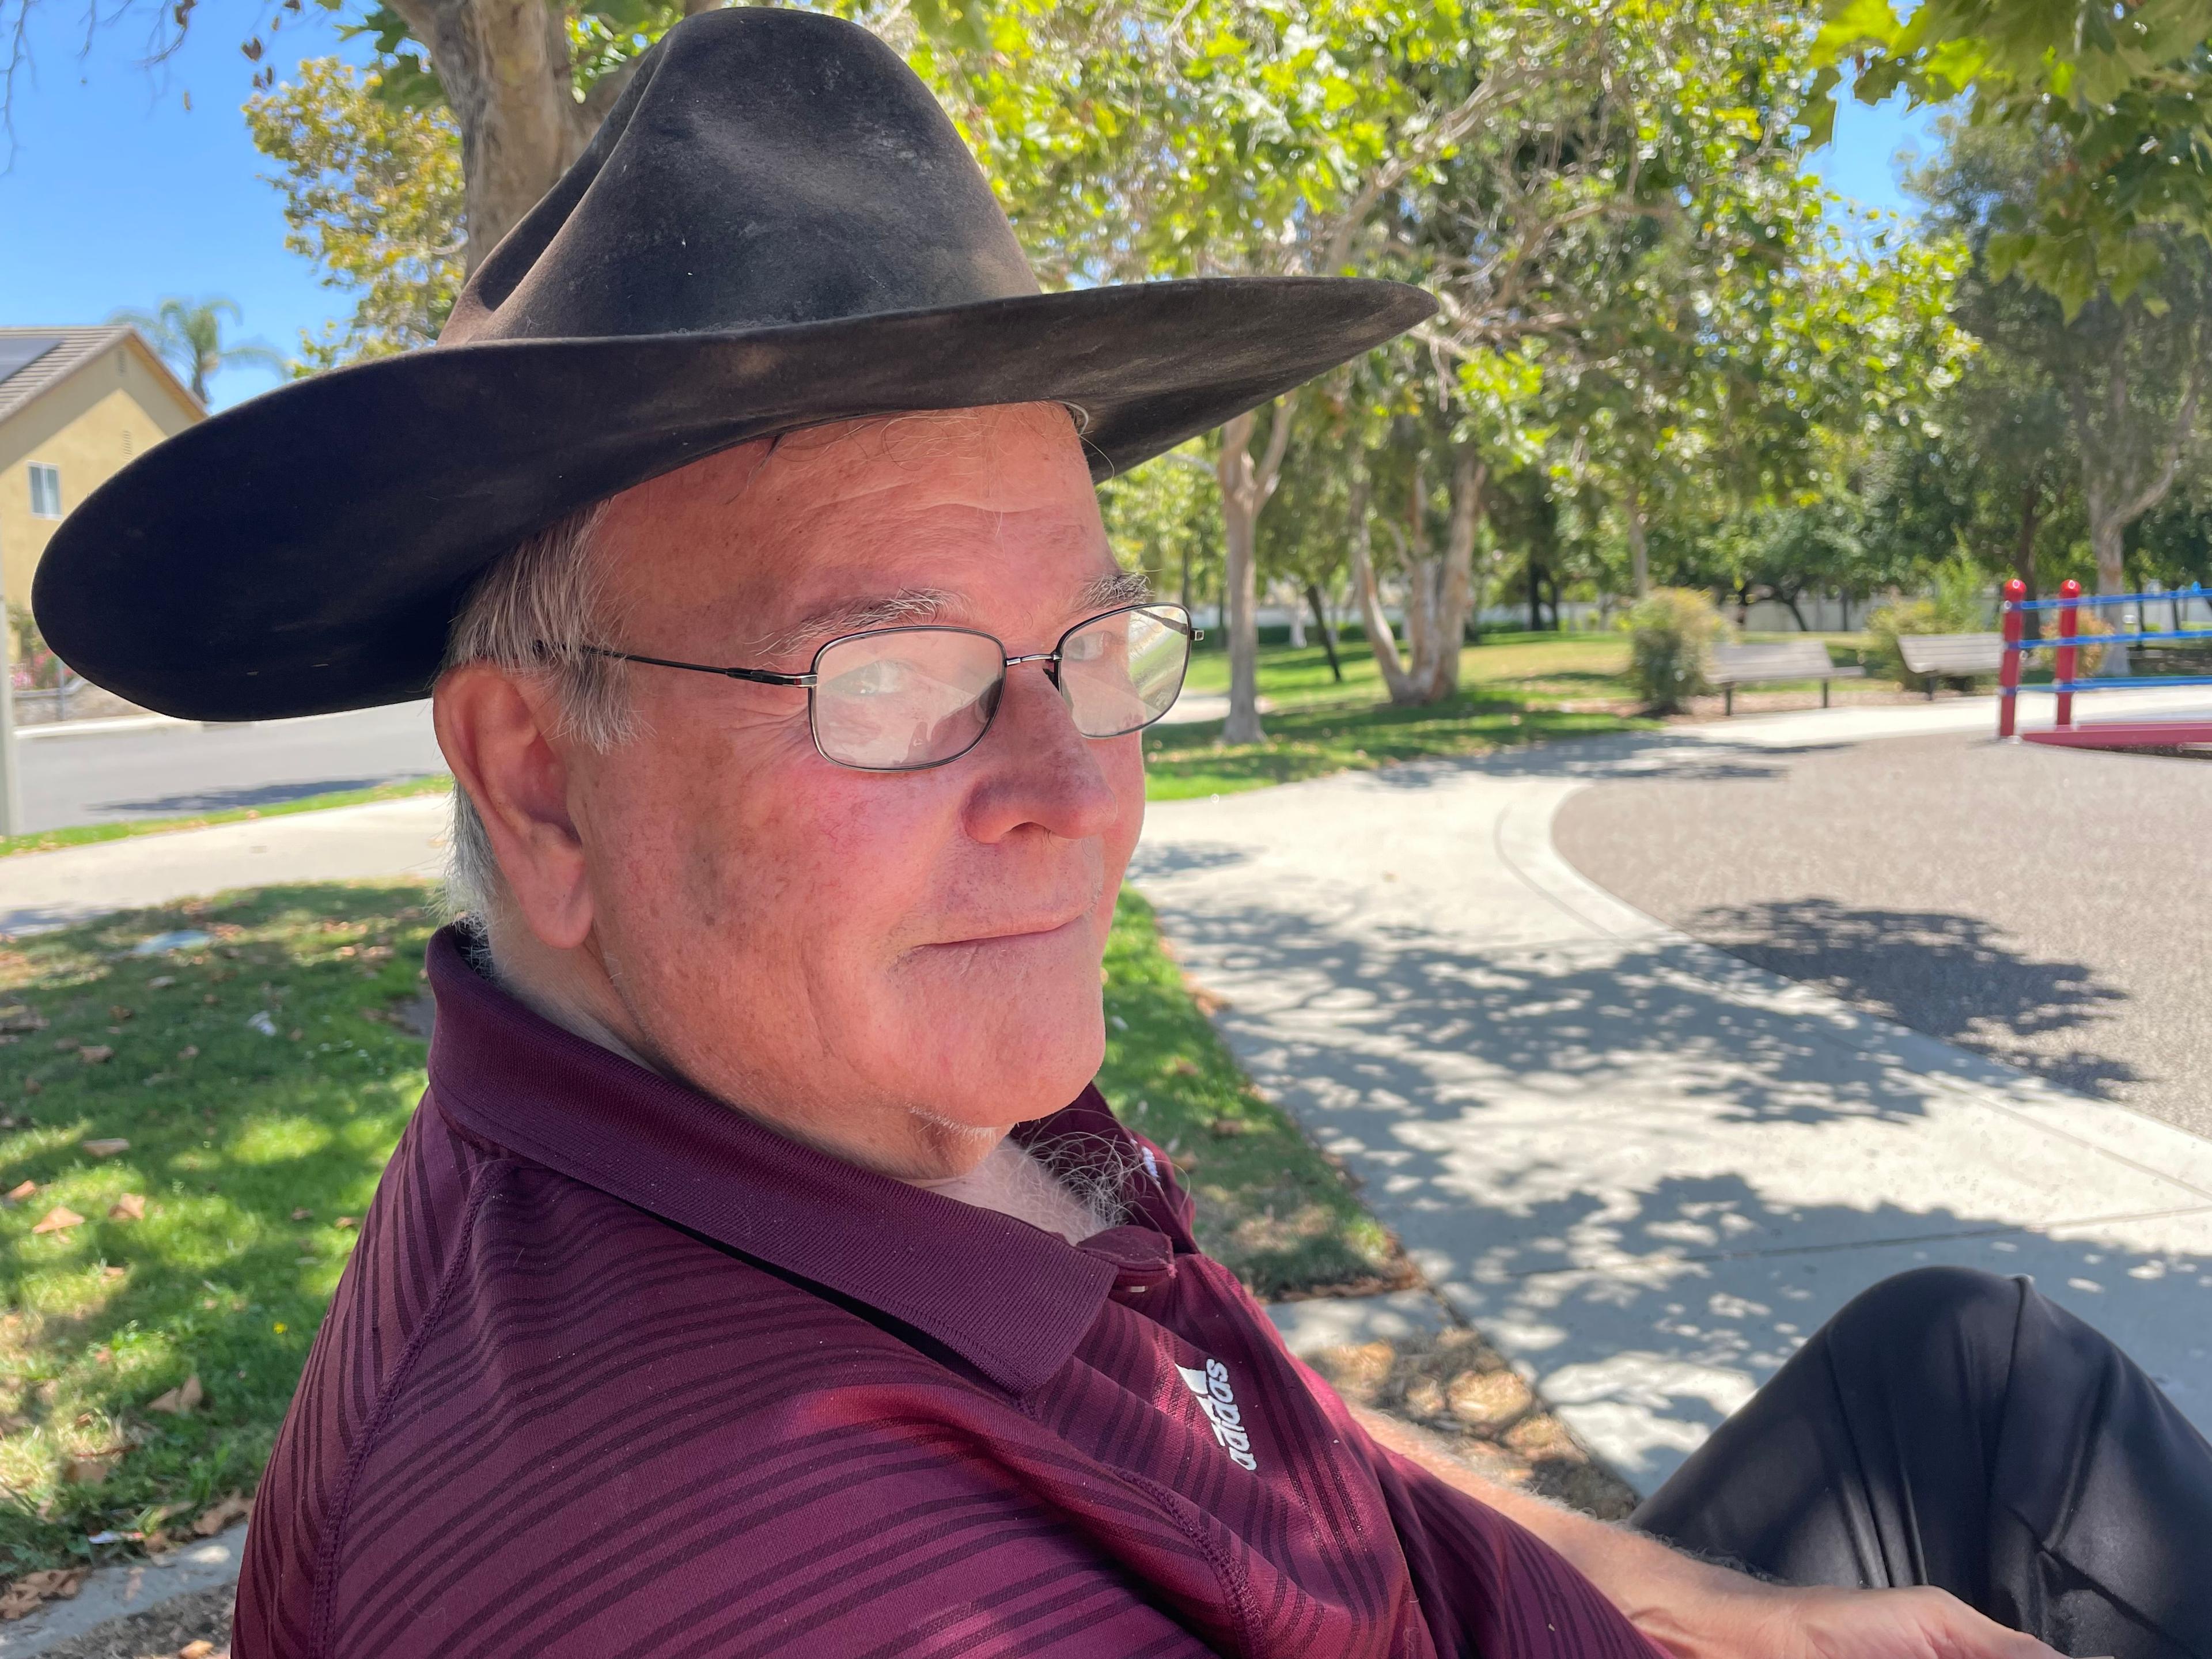 Southern California Rancher Refuses to Vaccinate His Cattle, Makes ‘So Much Money’ Off Vaccine-Free Beef